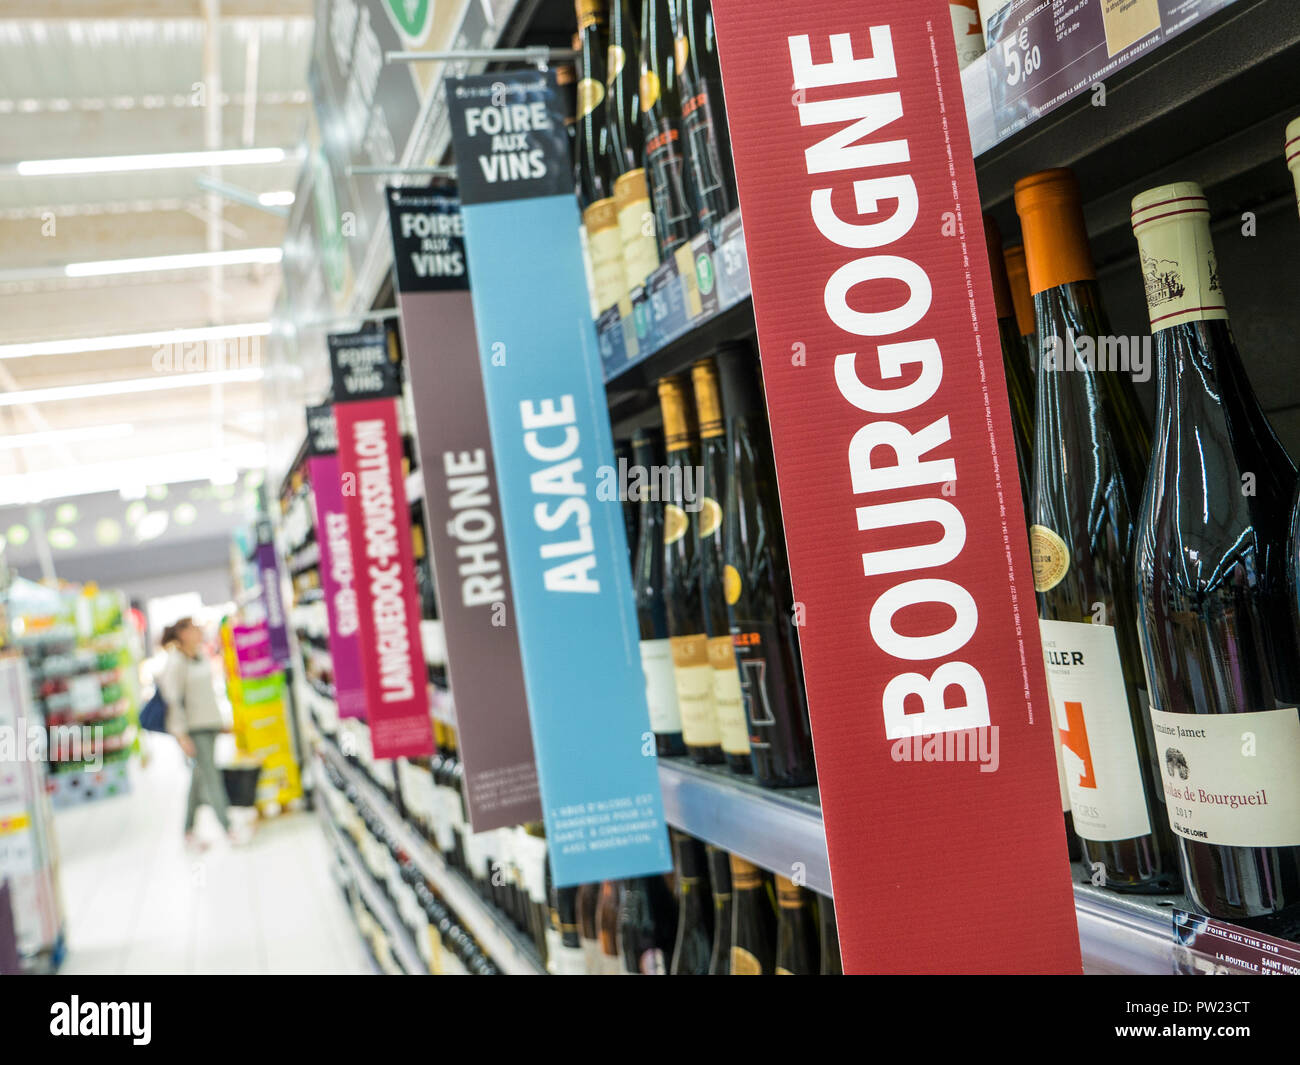 French wine varieties banners bottles supermarket aisle & BOURGOGNE sign wine display feature French supermarket, woman shopper behind Brittany France Stock Photo